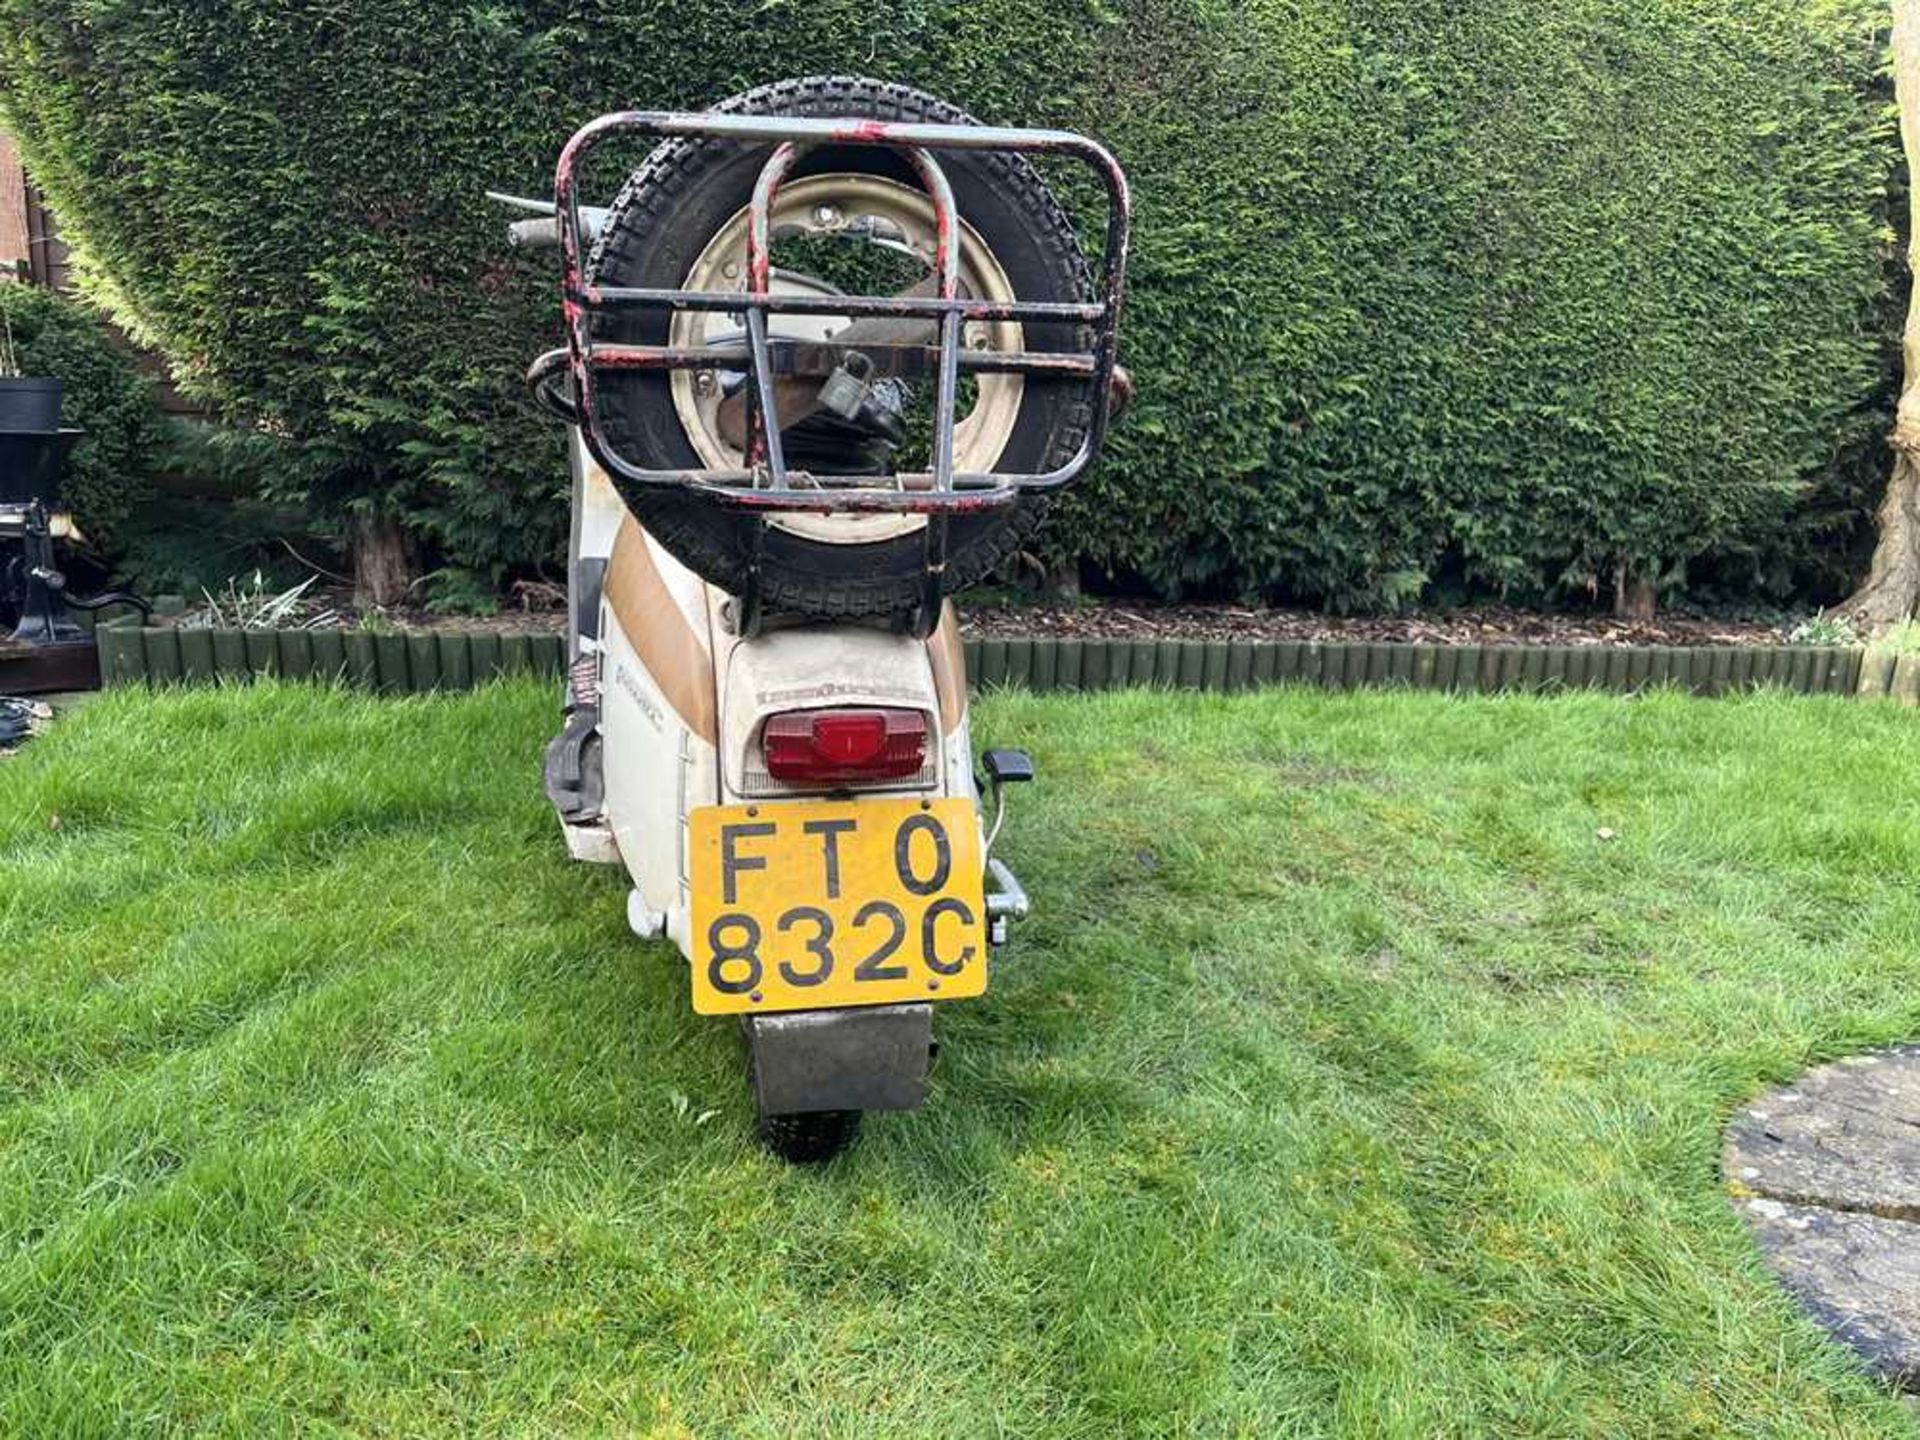 1965 Lambretta GT200 Extremely original with complete provenance - Image 6 of 148